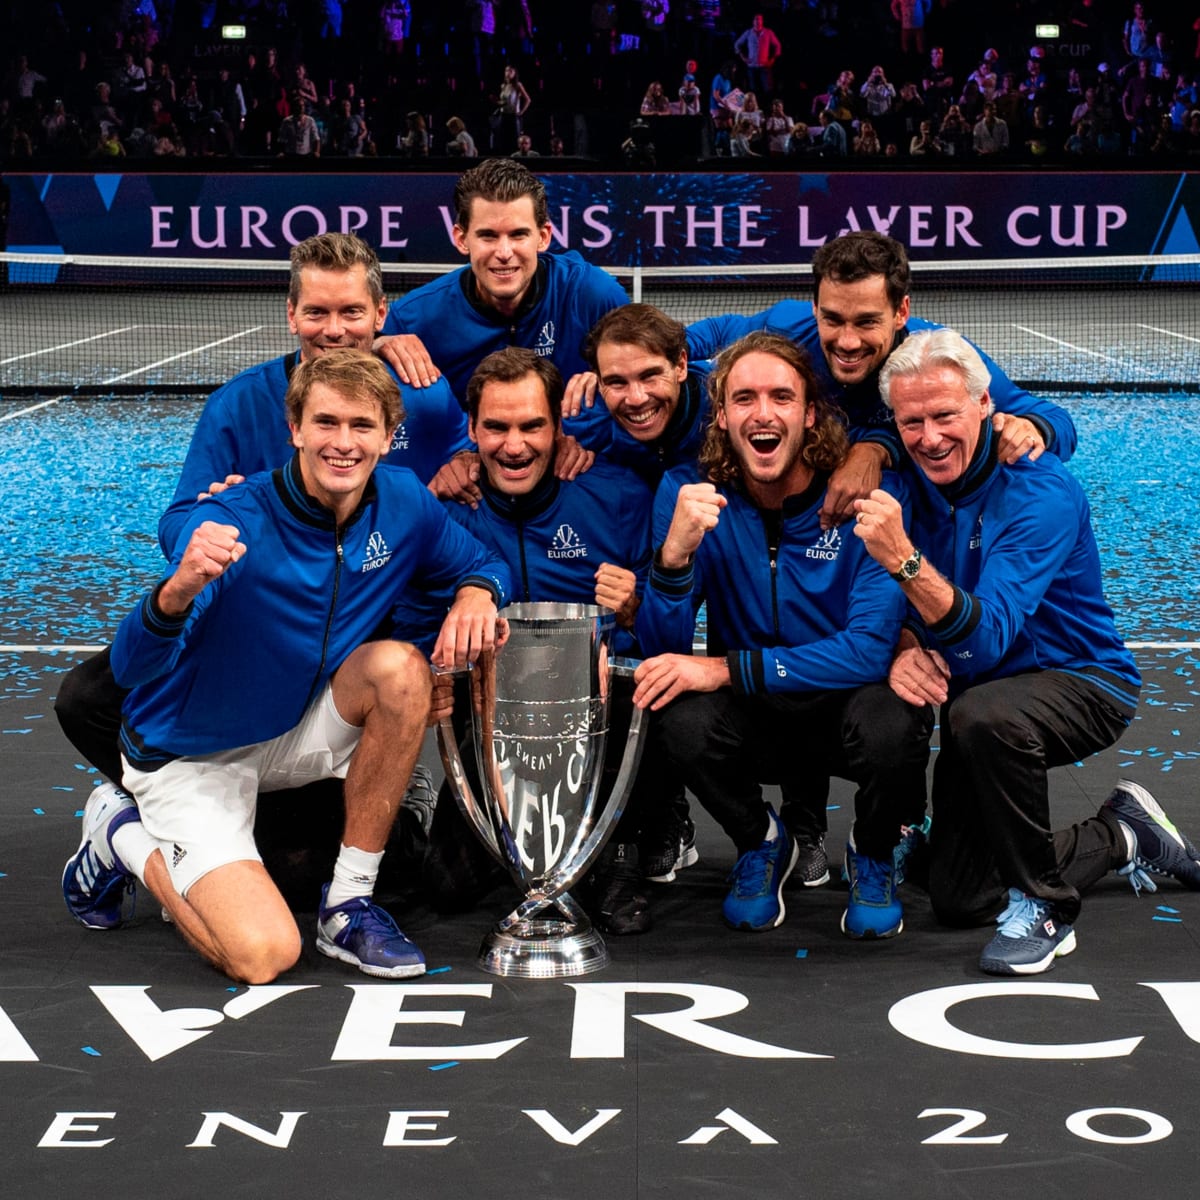 Jon Wertheim Mailbag Its time to add women to the Laver Cup